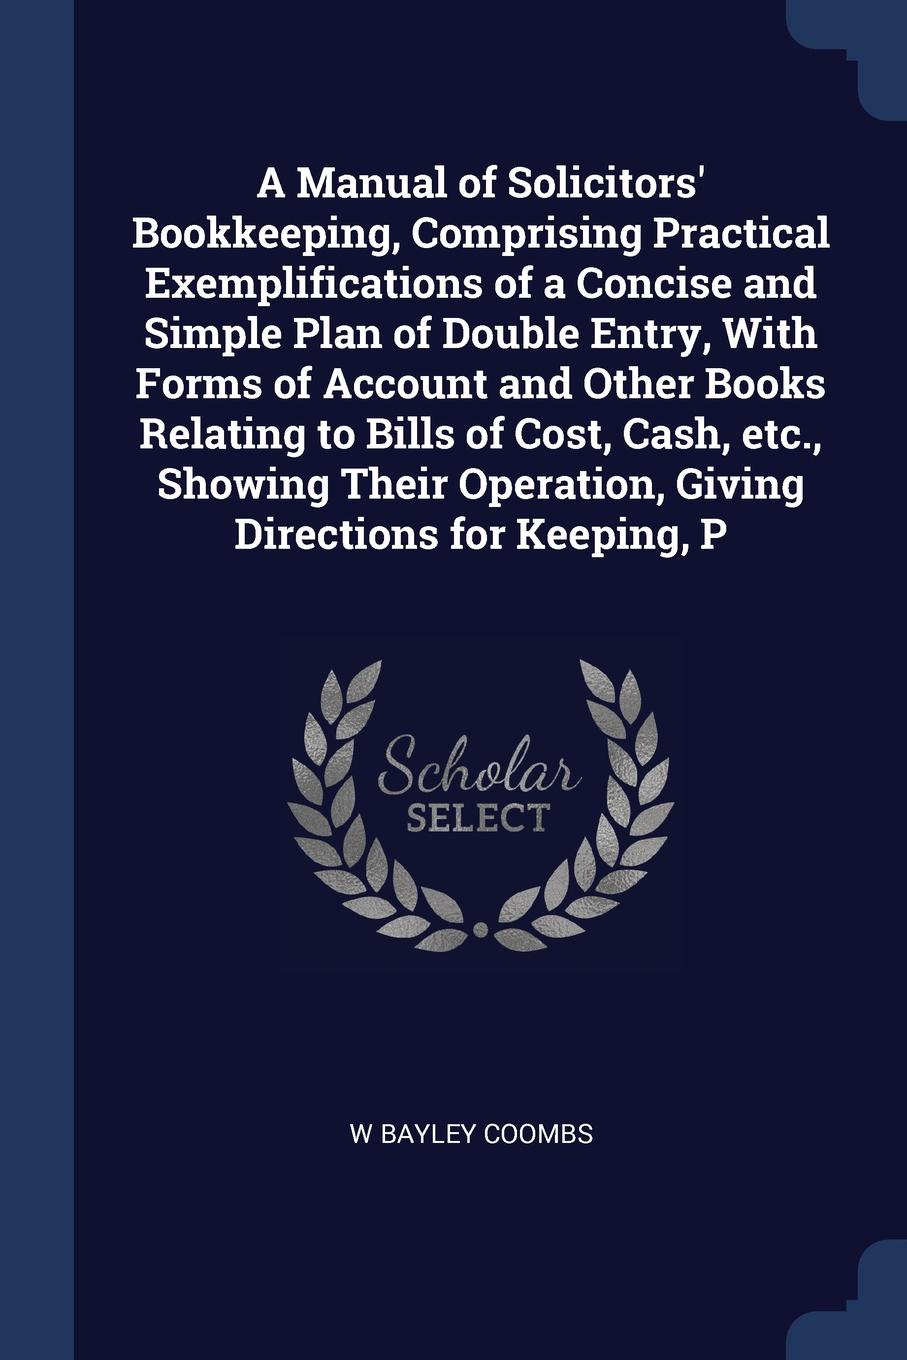 A Manual of Solicitors` Bookkeeping, Comprising Practical Exemplifications of a Concise and Simple Plan of Double Entry, With Forms of Account and Other Books Relating to Bills of Cost, Cash, etc., Showing Their Operation, Giving Directions for Ke...